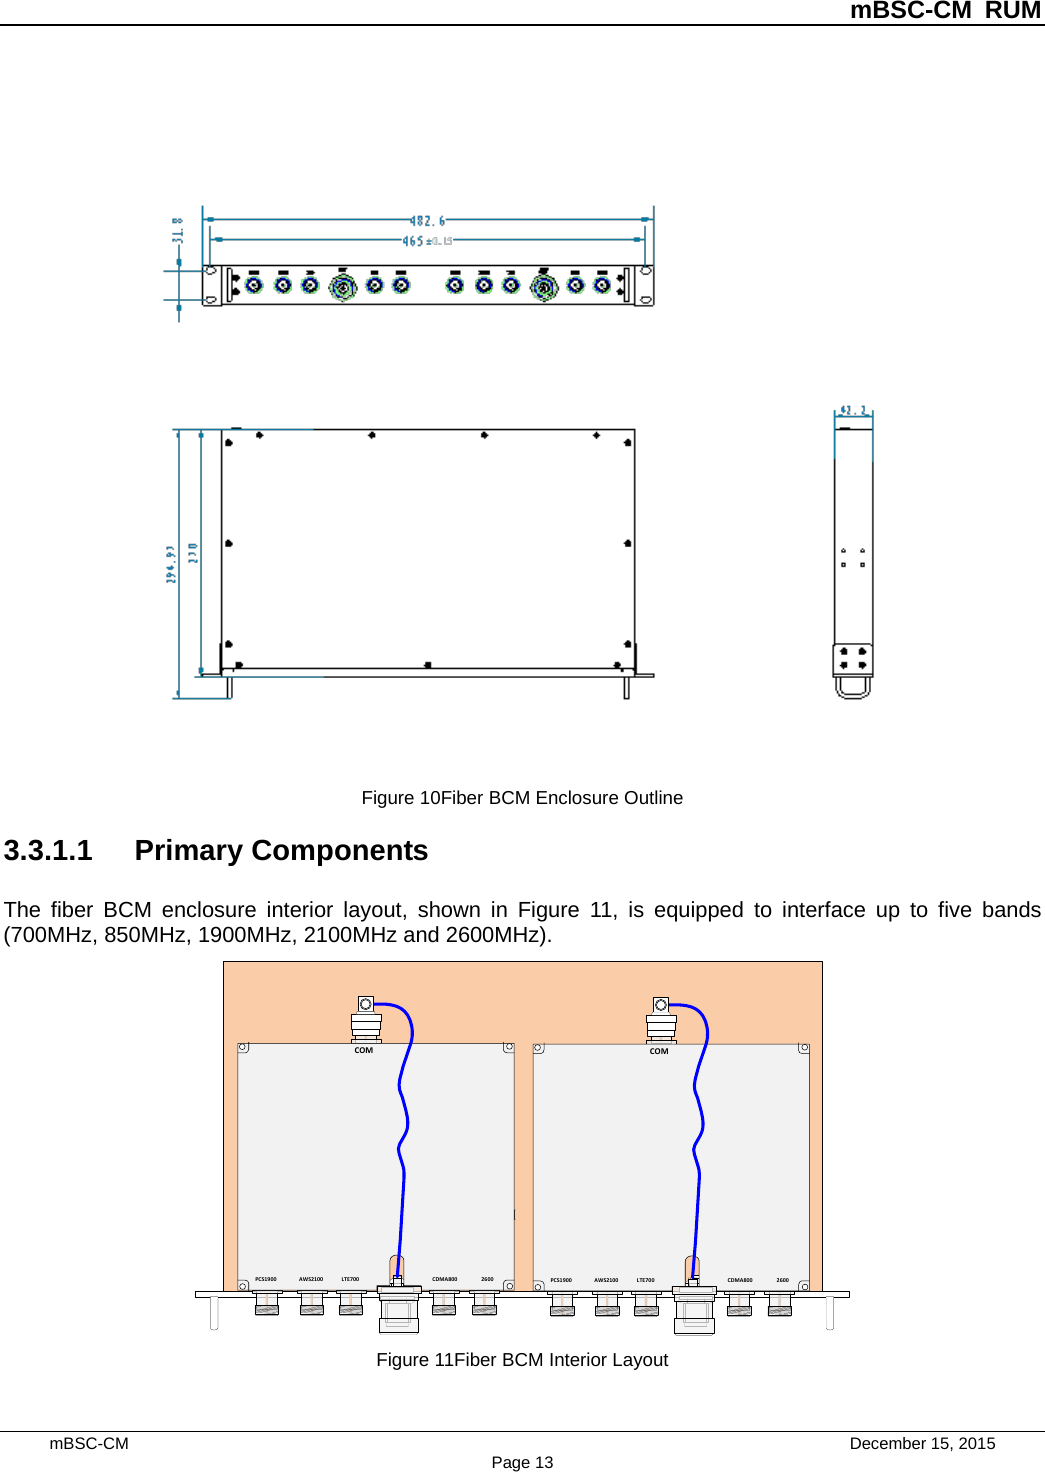          mBSC-CM RUM   mBSC-CM                                 December 15, 2015 Page 13    Figure 10Fiber BCM Enclosure Outline 3.3.1.1 Primary Components The fiber  BCM enclosure interior layout, shown in Figure  11,  is equipped to interface up to five bands (700MHz, 850MHz, 1900MHz, 2100MHz and 2600MHz).   430MMPCS1900 AWS2100 LTE700 CDMA800 2600COMPCS1900 AWS2100 LTE700 CDMA800 2600COM Figure 11Fiber BCM Interior Layout 